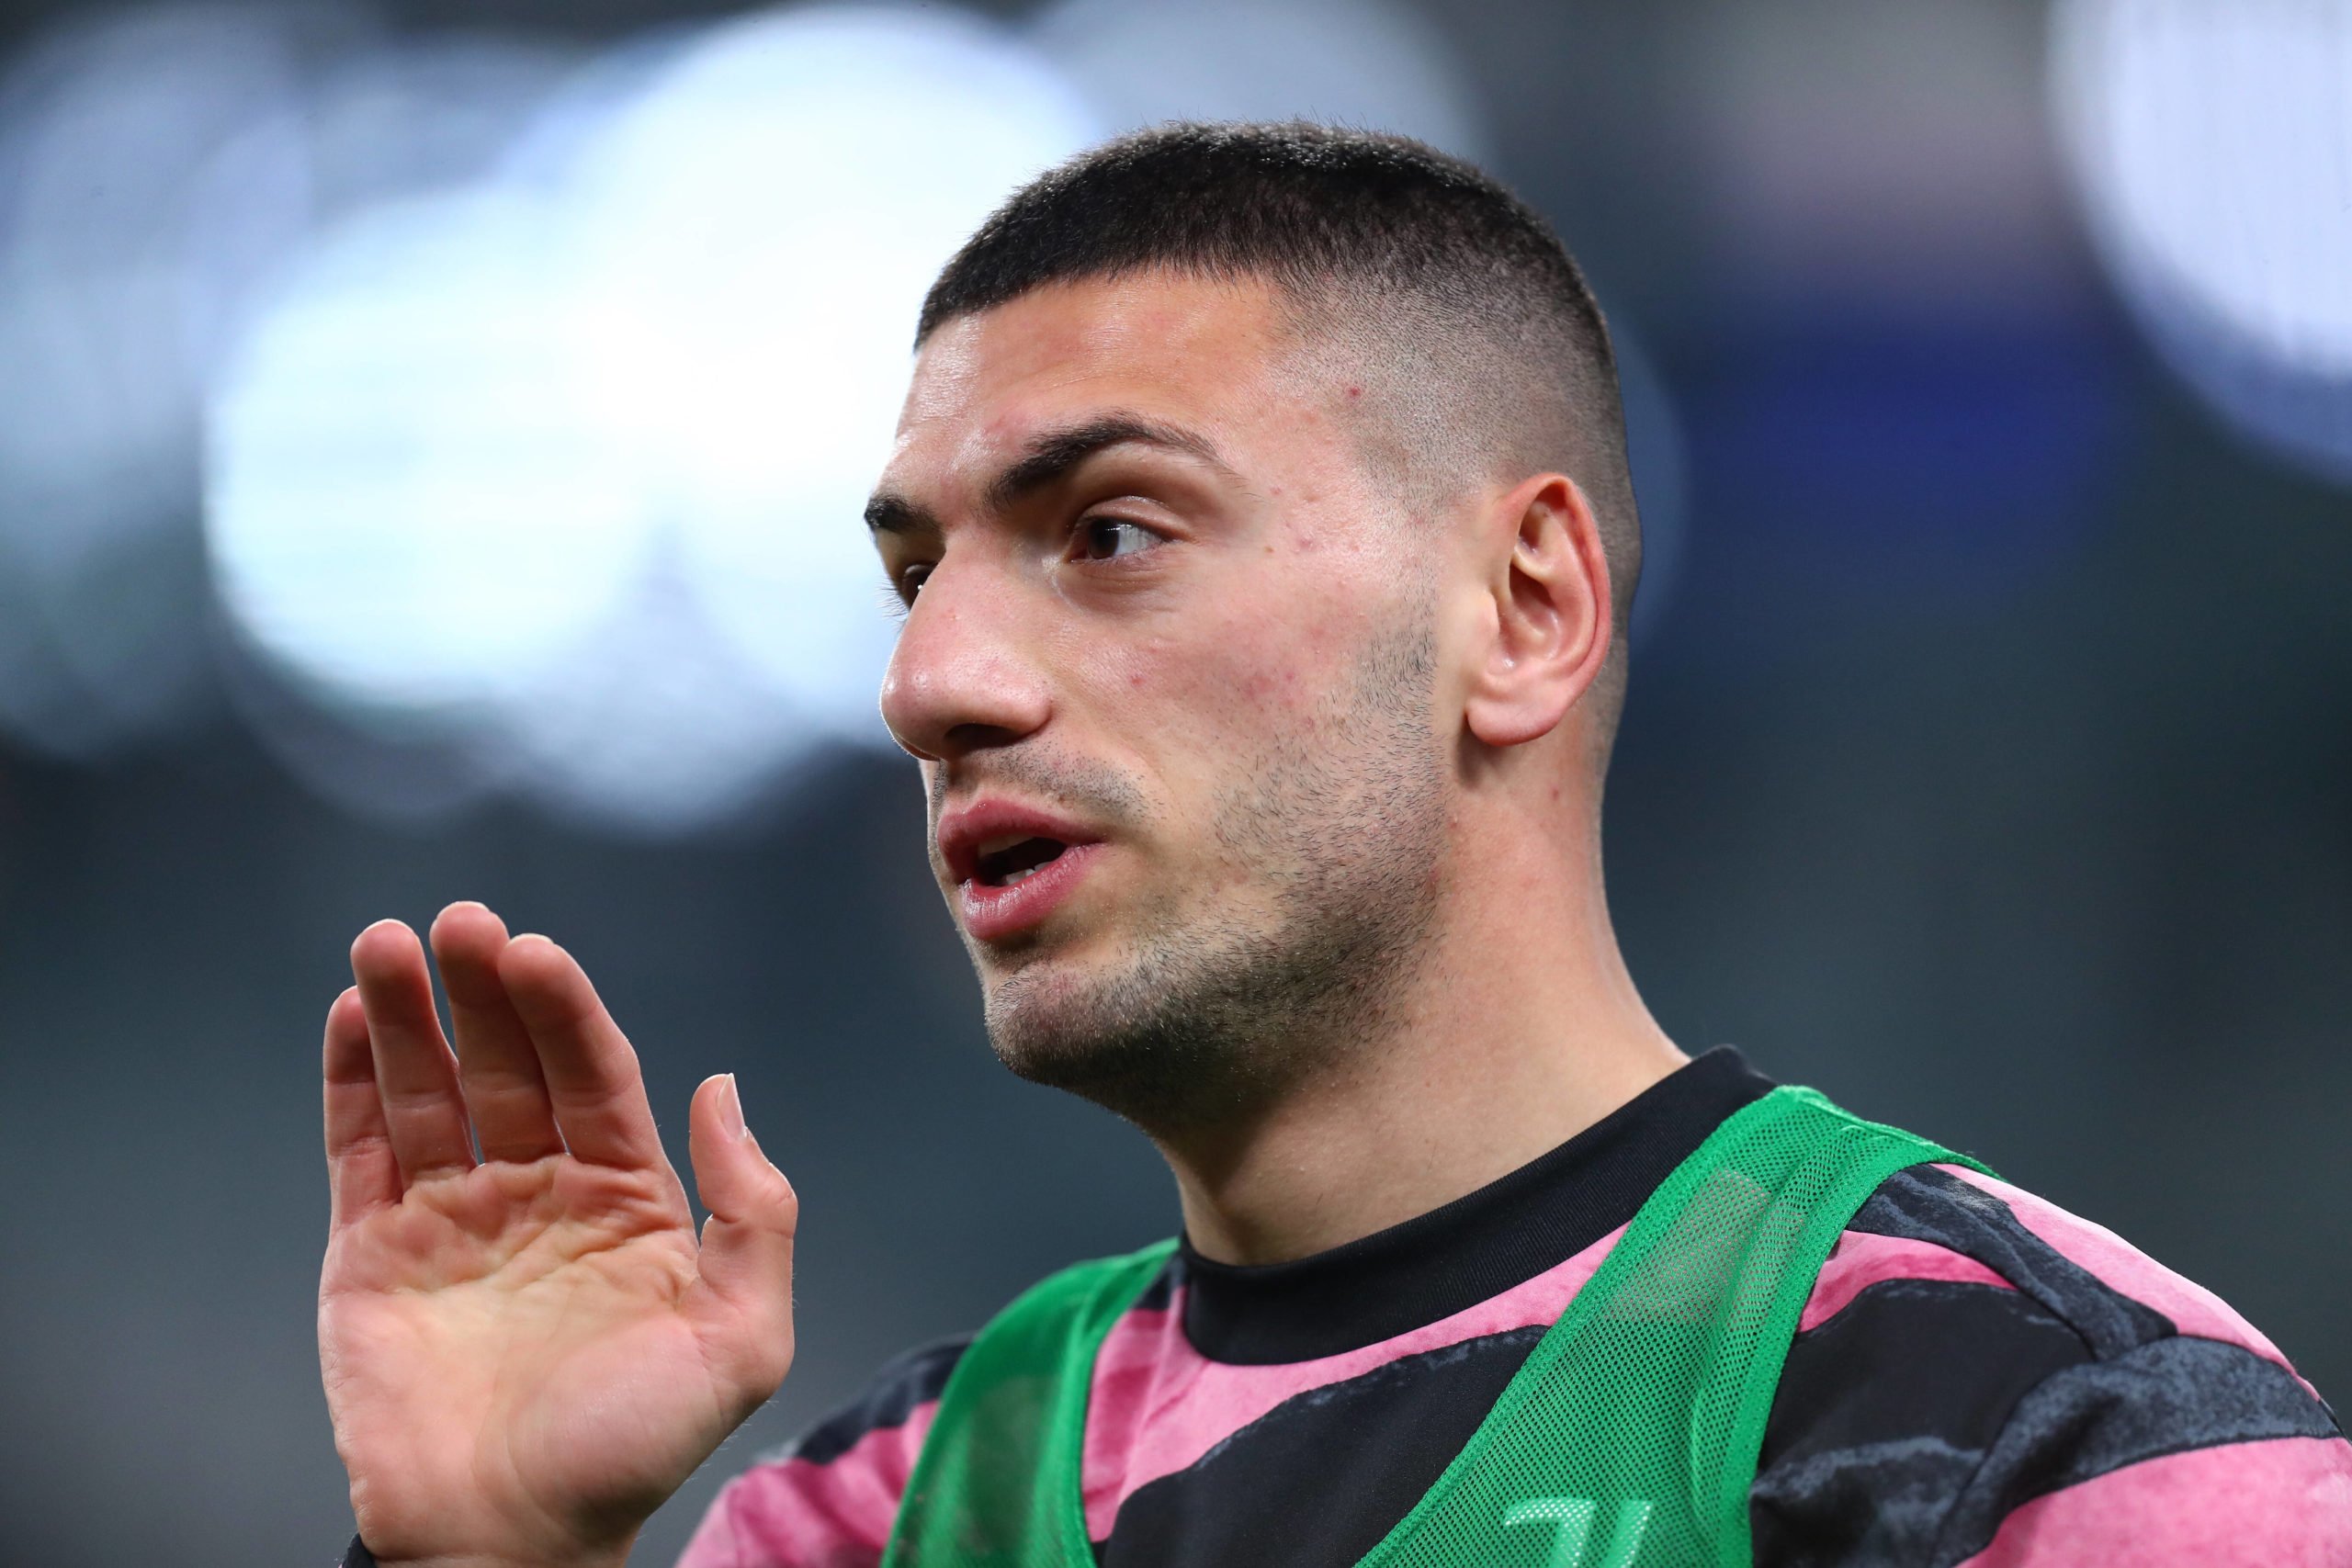 Demiral wants to leave amid Everton interest (Demiral is seen in the photo)